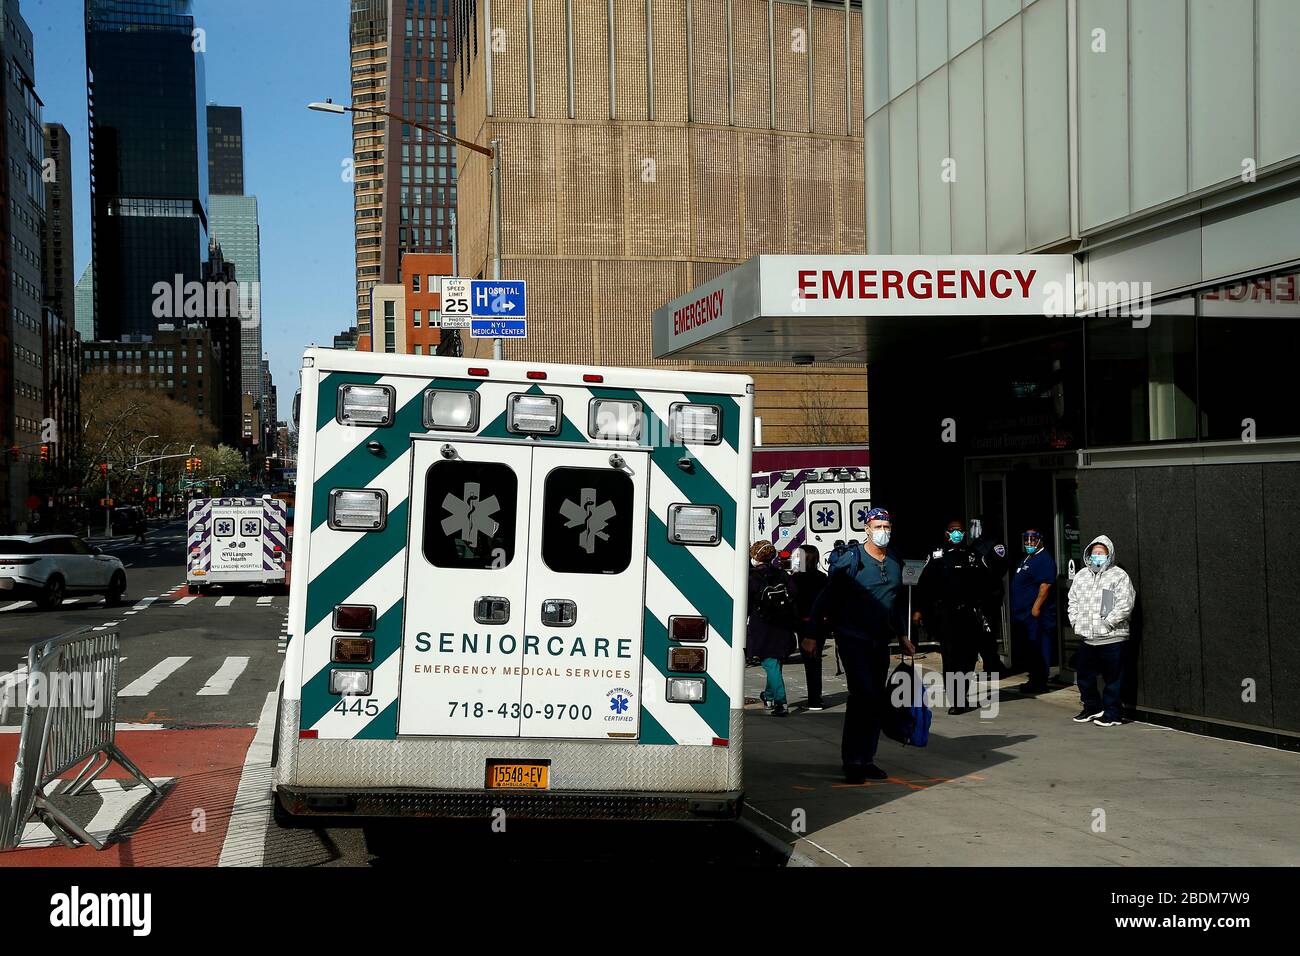 New York, United States. 07th Apr, 2020. An ambulance is parked by NYU Langone Hospital. With the mounting cases of COVID-19, the call centers around the city have seen a 50 percent rise in 911 calls overwhelming the Emergency Services Technicians personnel. Consequently, FEMA has sent 250 ambulances and 500 EMT personnel to New York. Additionally, while there are no exact numbers of personal protective equipment (PPE) FEMA has sent to hospitals, shortages continue. Credit: SOPA Images Limited/Alamy Live News Stock Photo